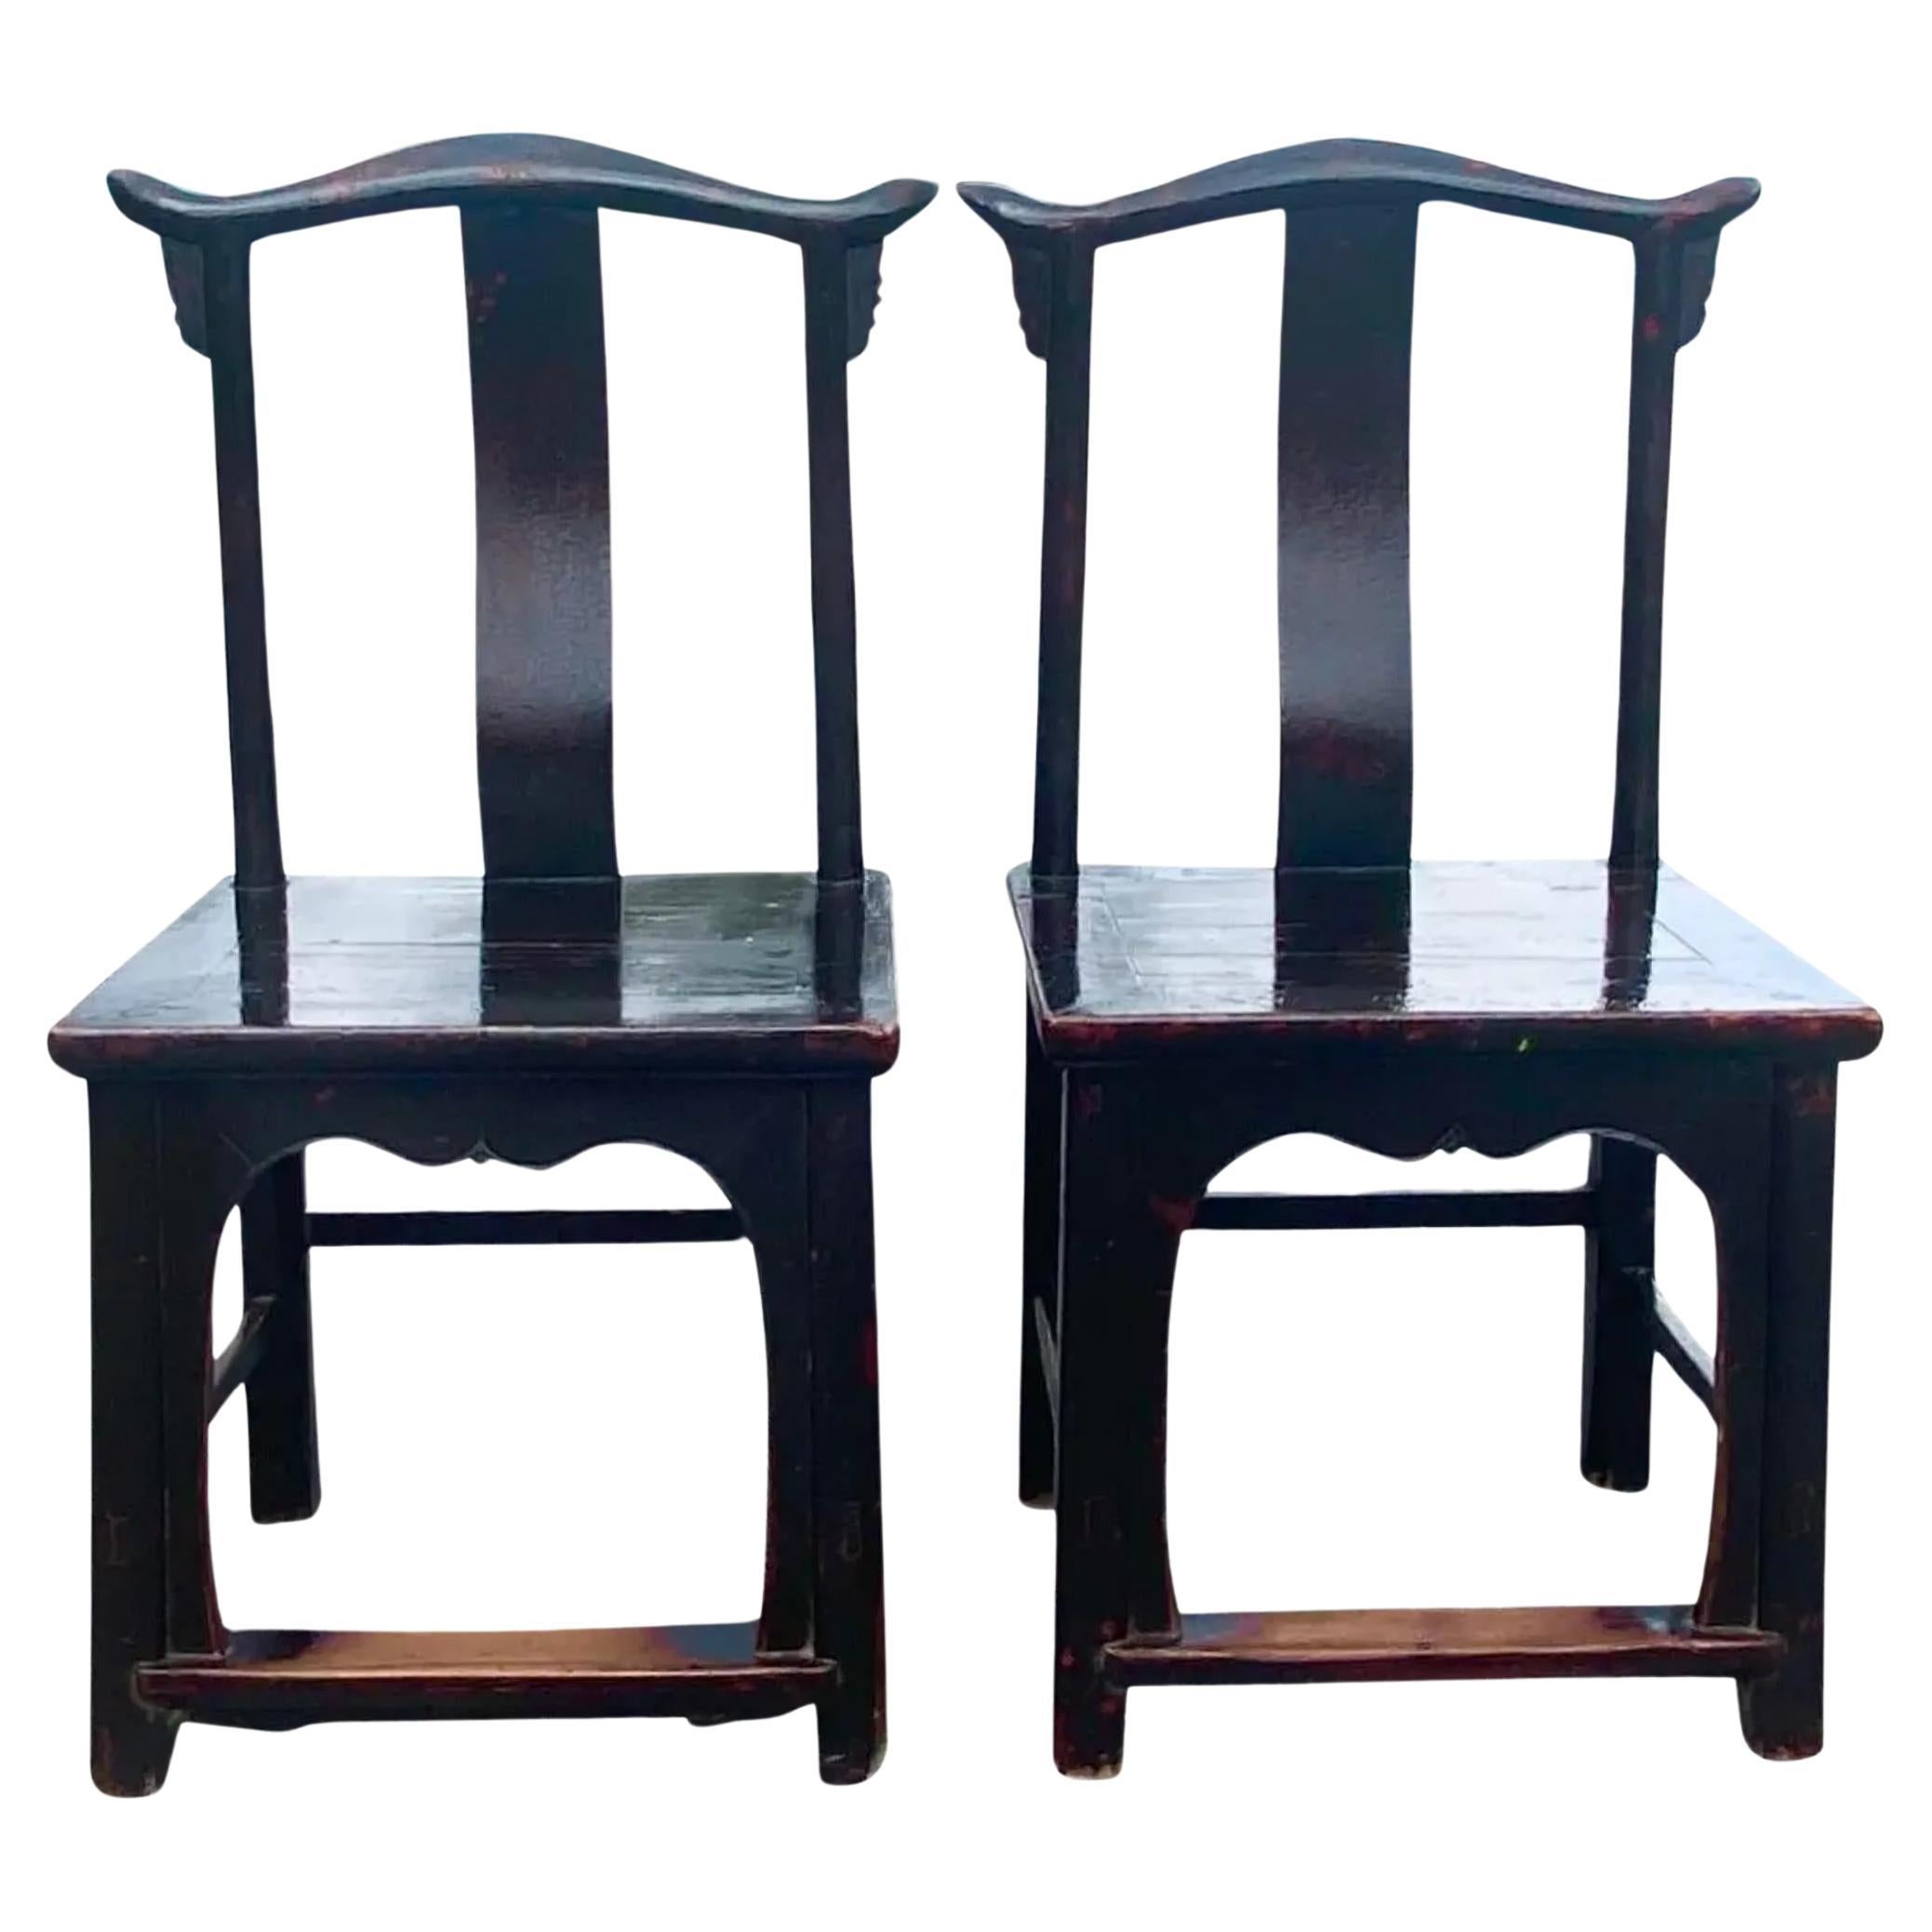 Vintage Asian Emperor Chairs - a Pair